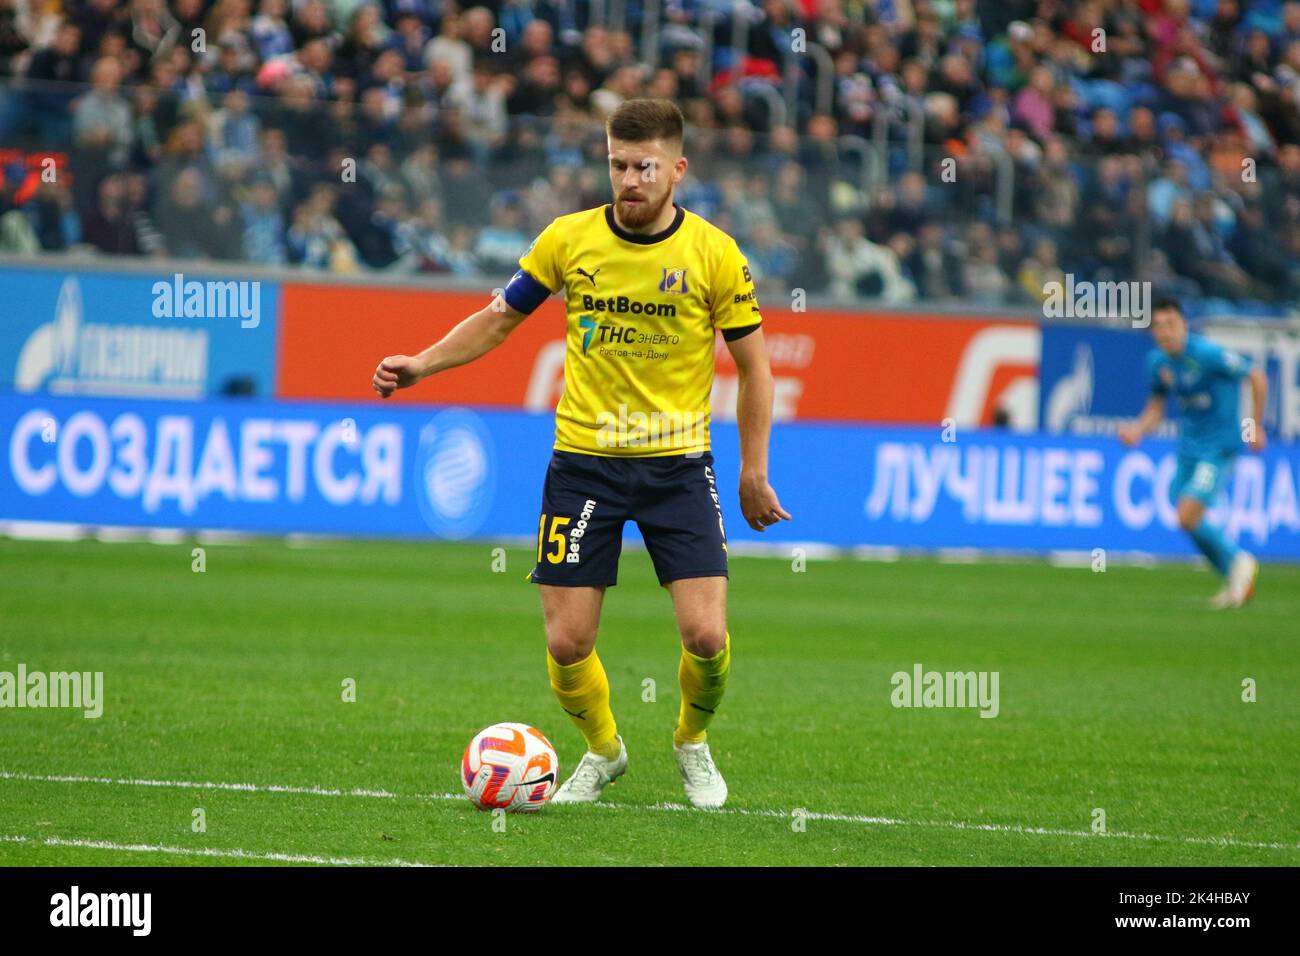 Saint Petersburg, Russia. 02nd Oct, 2022. Danil Glebov (No.15) of Rostov seen in action during the Russian Premier League football match between Zenit Saint Petersburg and Rostov at Gazprom Arena. Final score; Zenit 3:1 Rostov. (Photo by Maksim Konstantinov/SOPA Images/Sipa USA) Credit: Sipa USA/Alamy Live News Stock Photo